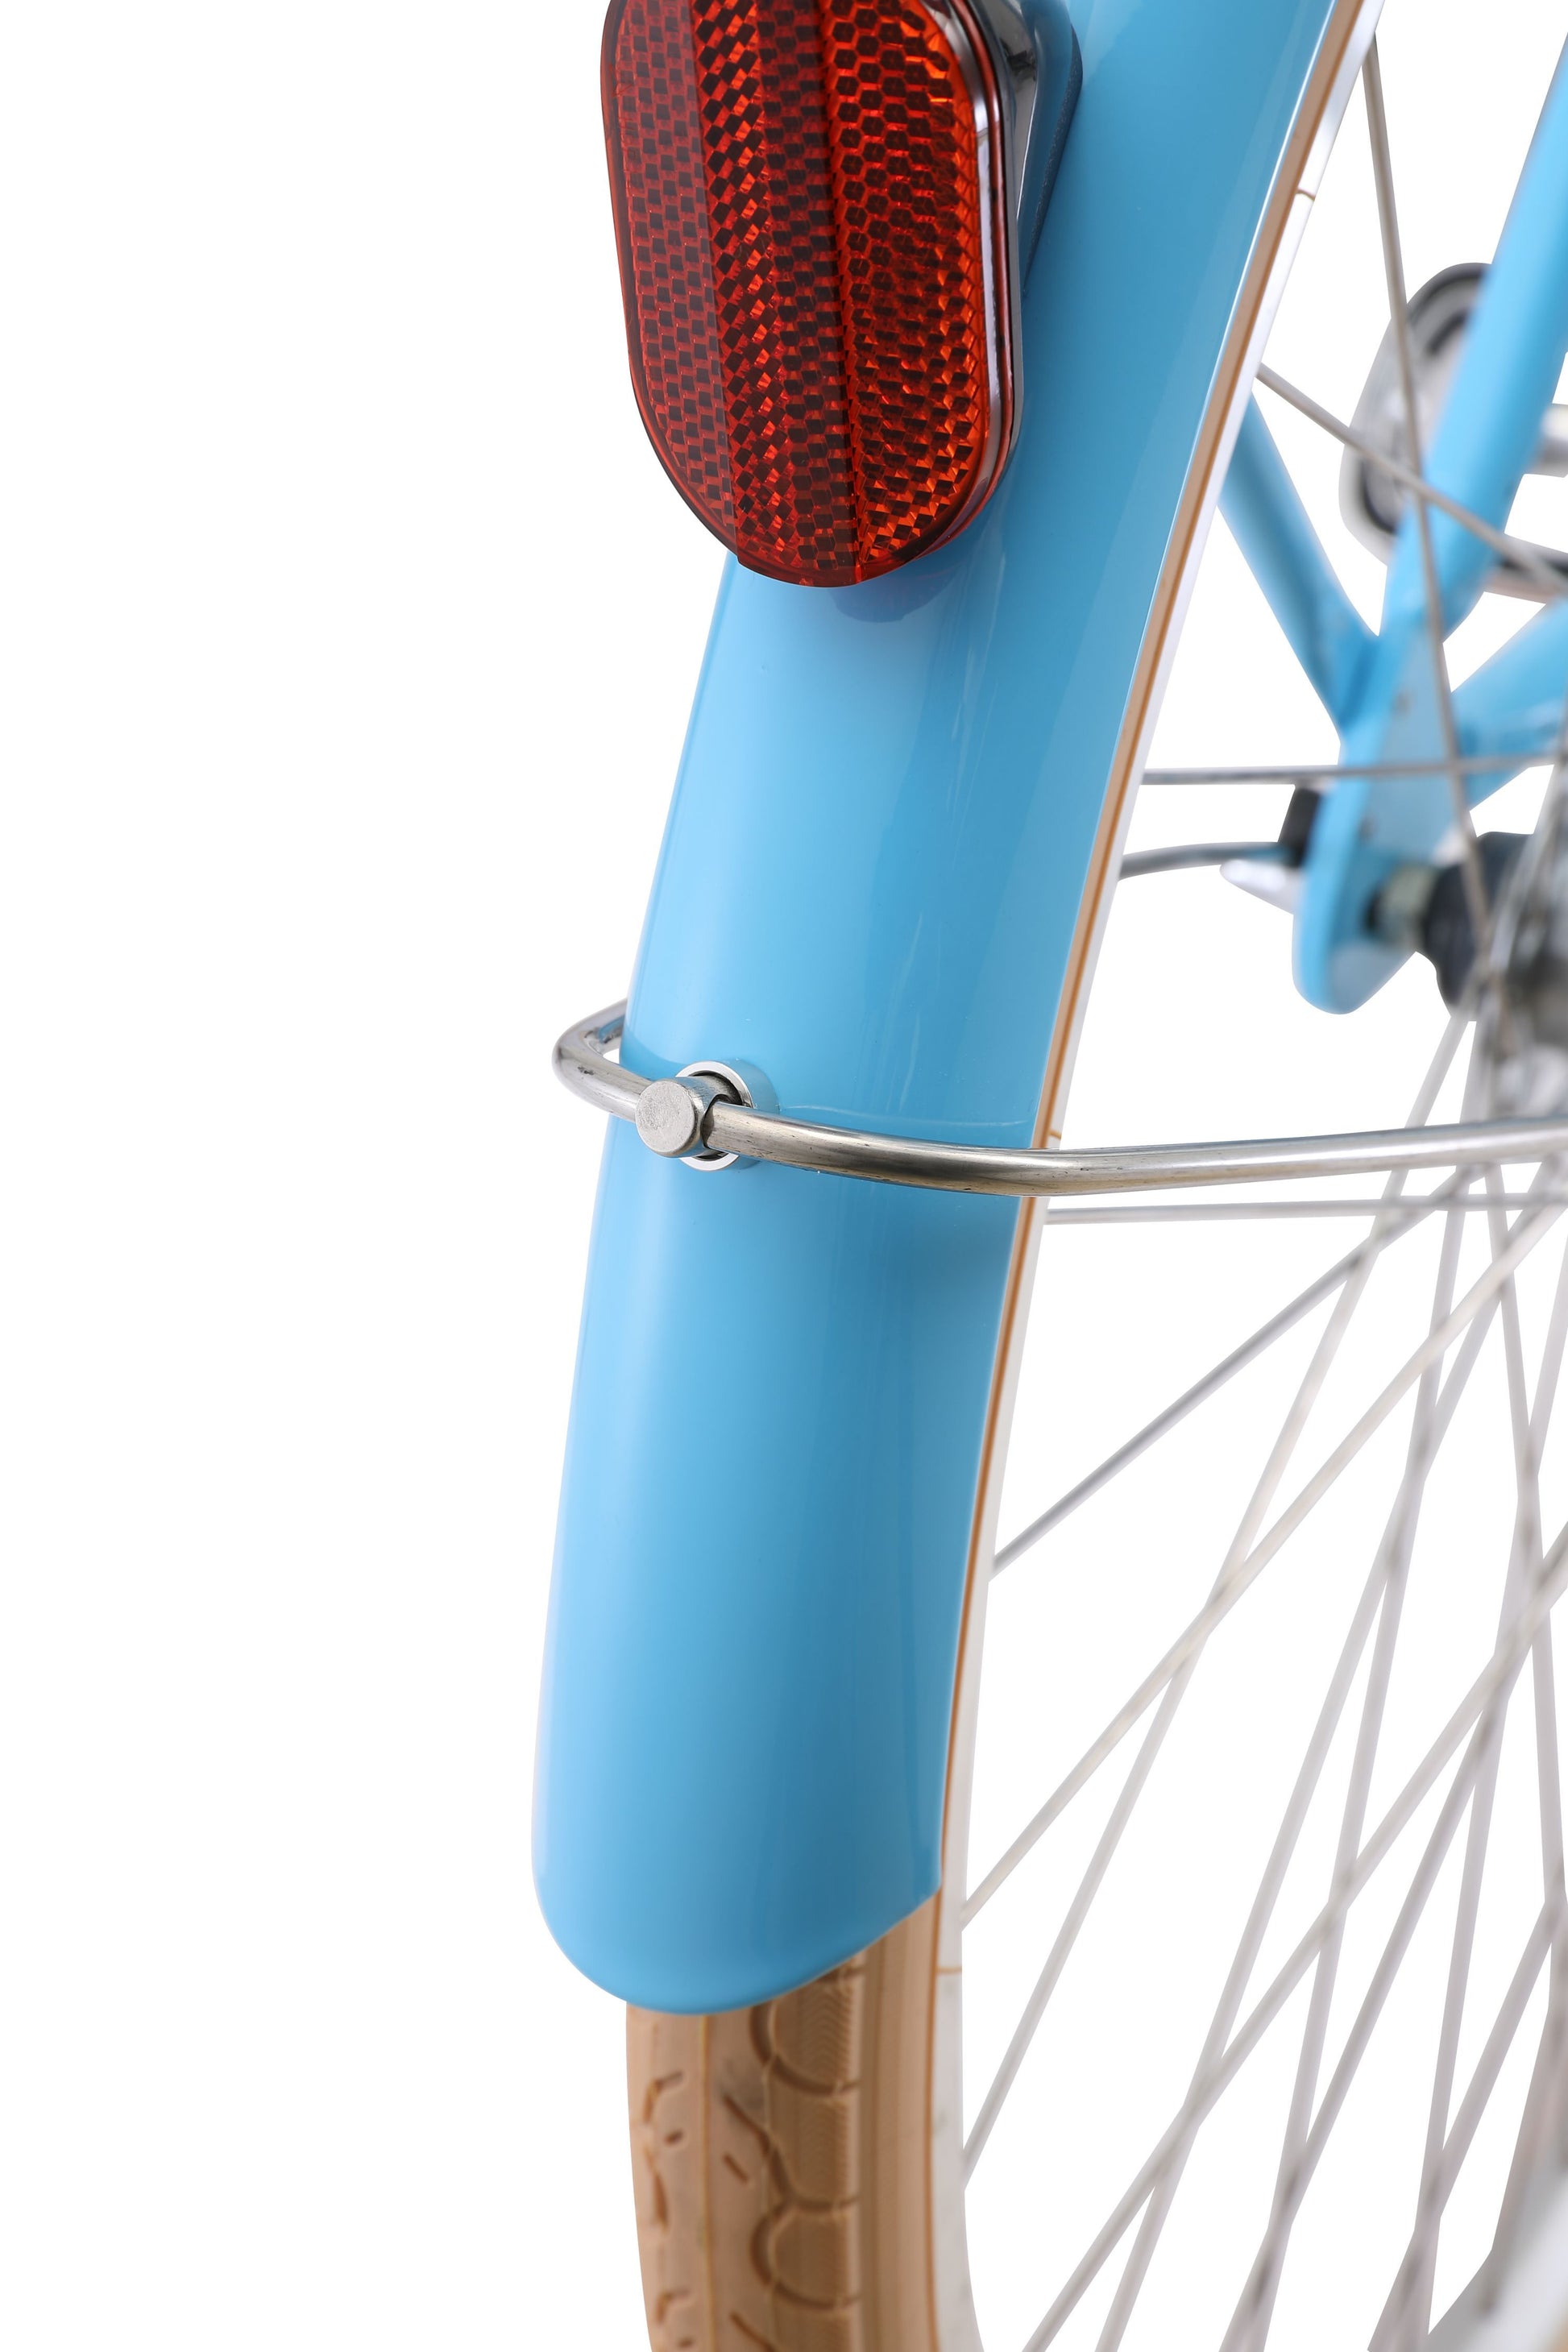 Ladies Deluxe Vintage Bike in Baby Blue showing rear mudguard and cream tyres from Reid Cycls Australia